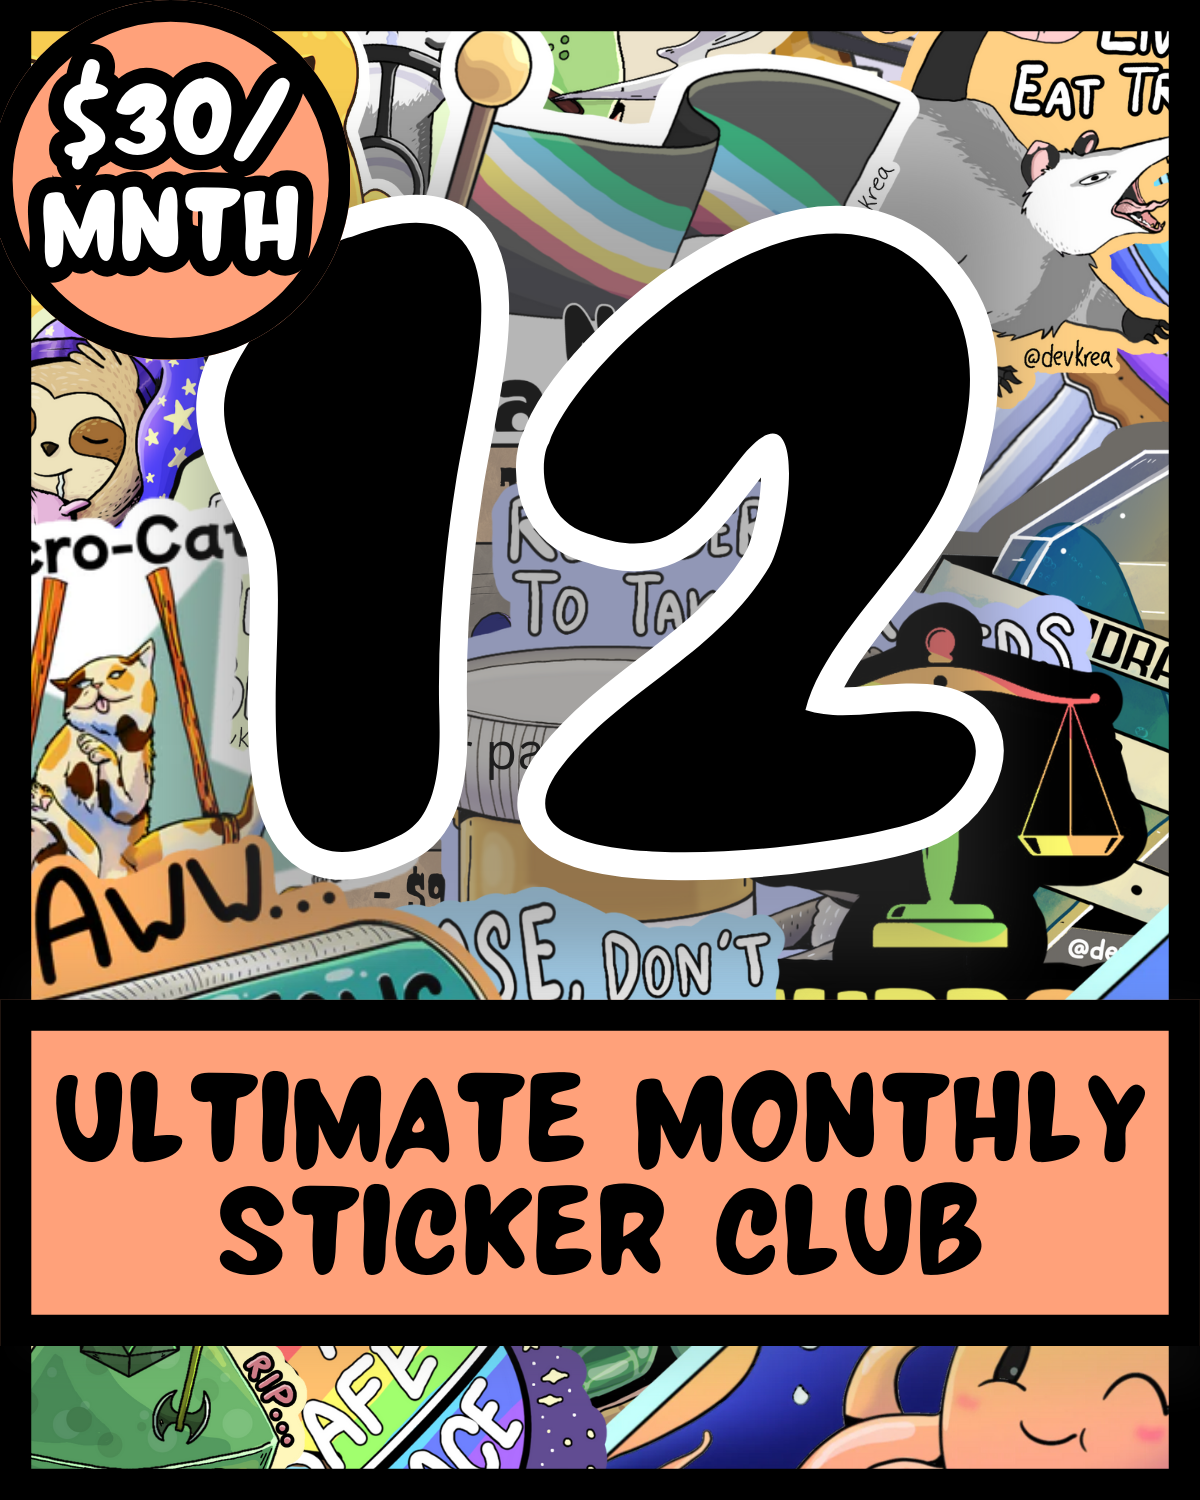 Ultimate Monthly Sticker Collection Club | Deviant Kreations - Deviantkreations